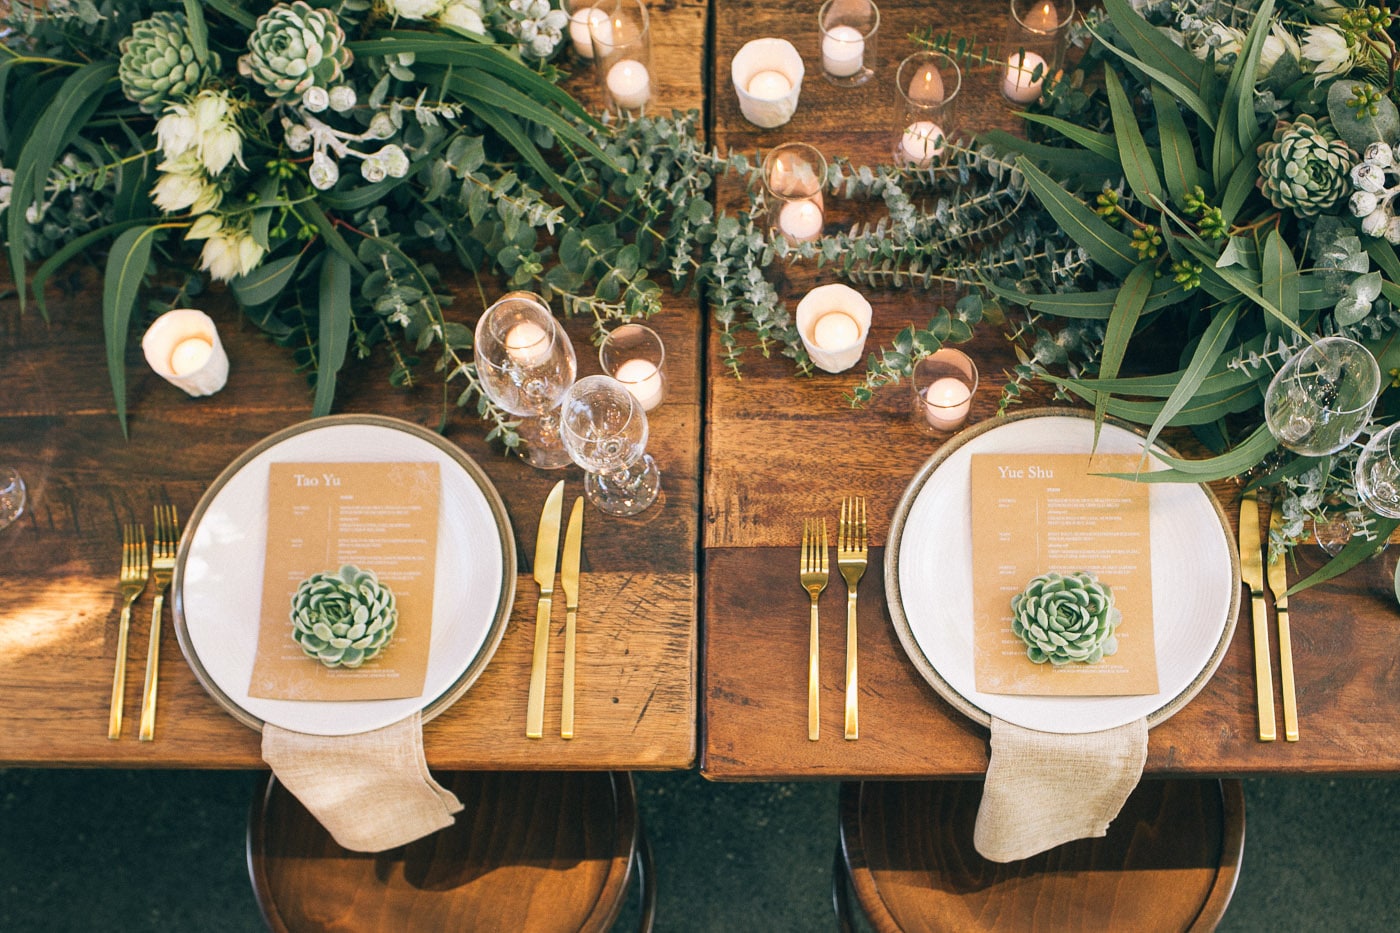 a lush green tabletop | design by the style co via coco kelley